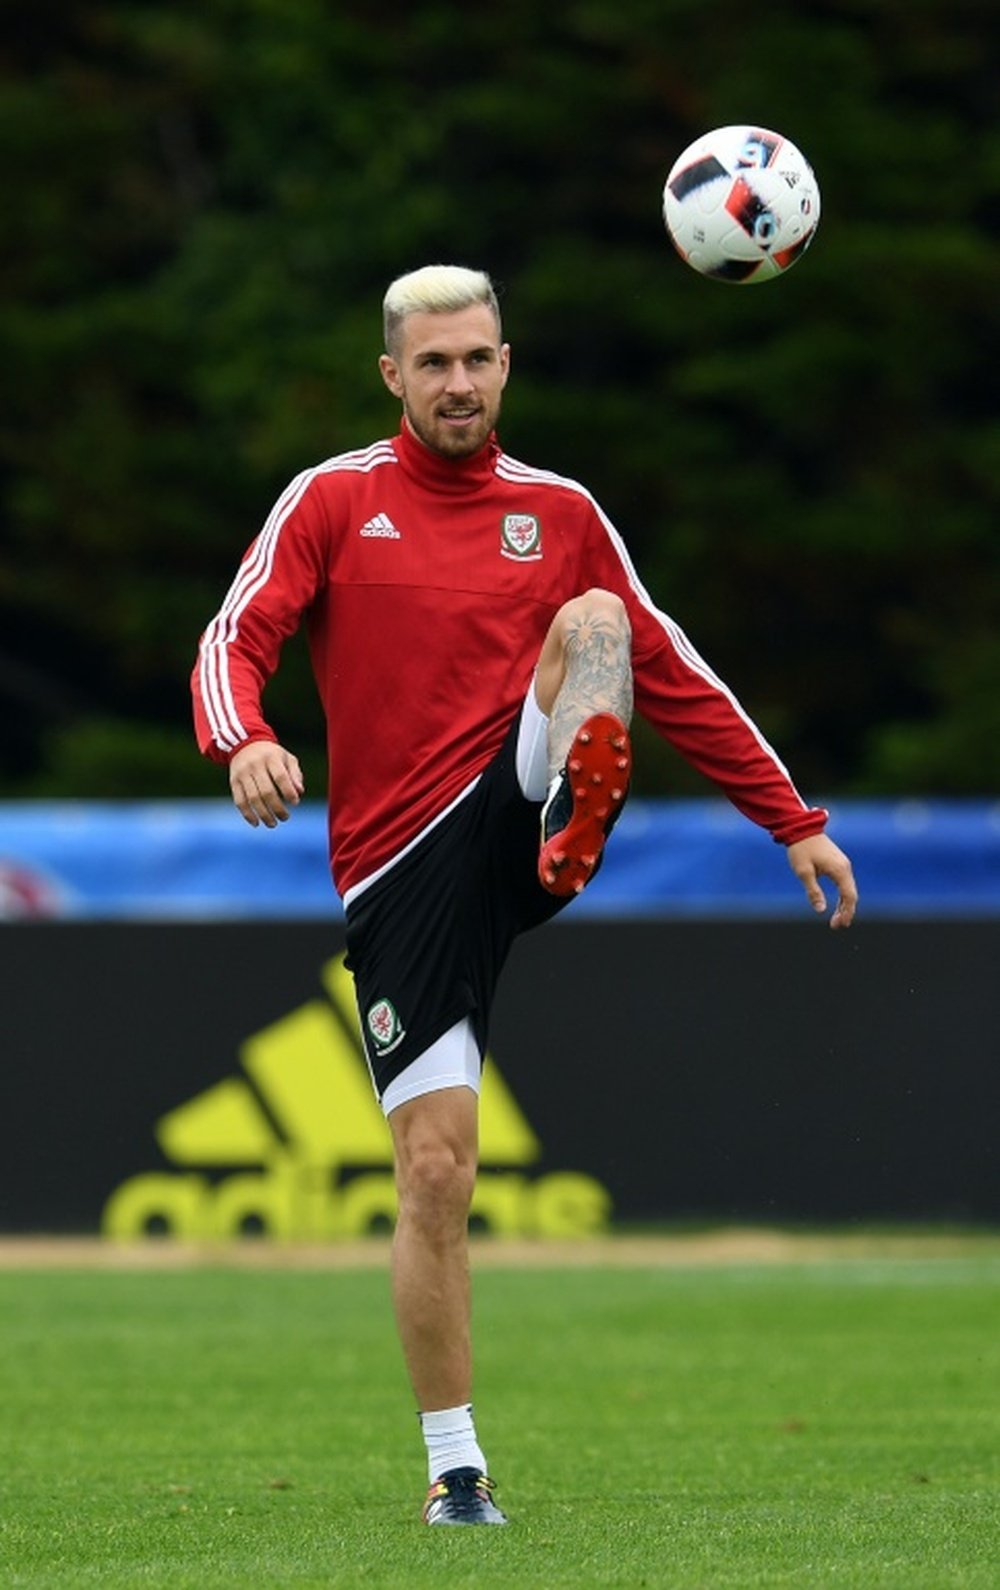 Ramsey won't be adding to his 44 caps in Wales' upcoming World Cup qualifiers. AFP